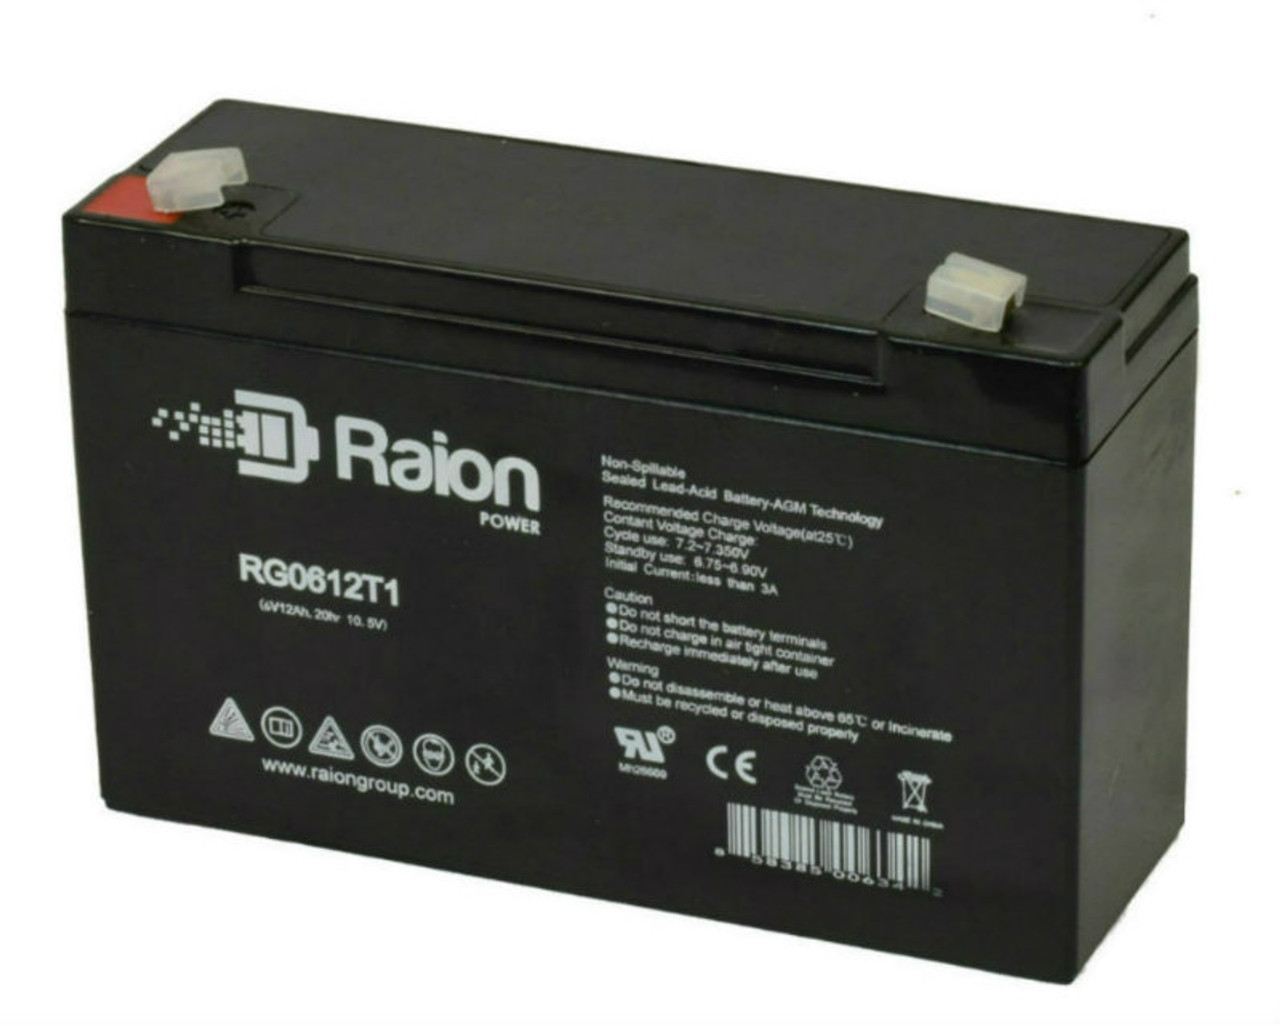 Raion Power RG06120T1 Replacement 6V 12Ah Emergency Light Battery for Sure-Lites XR11